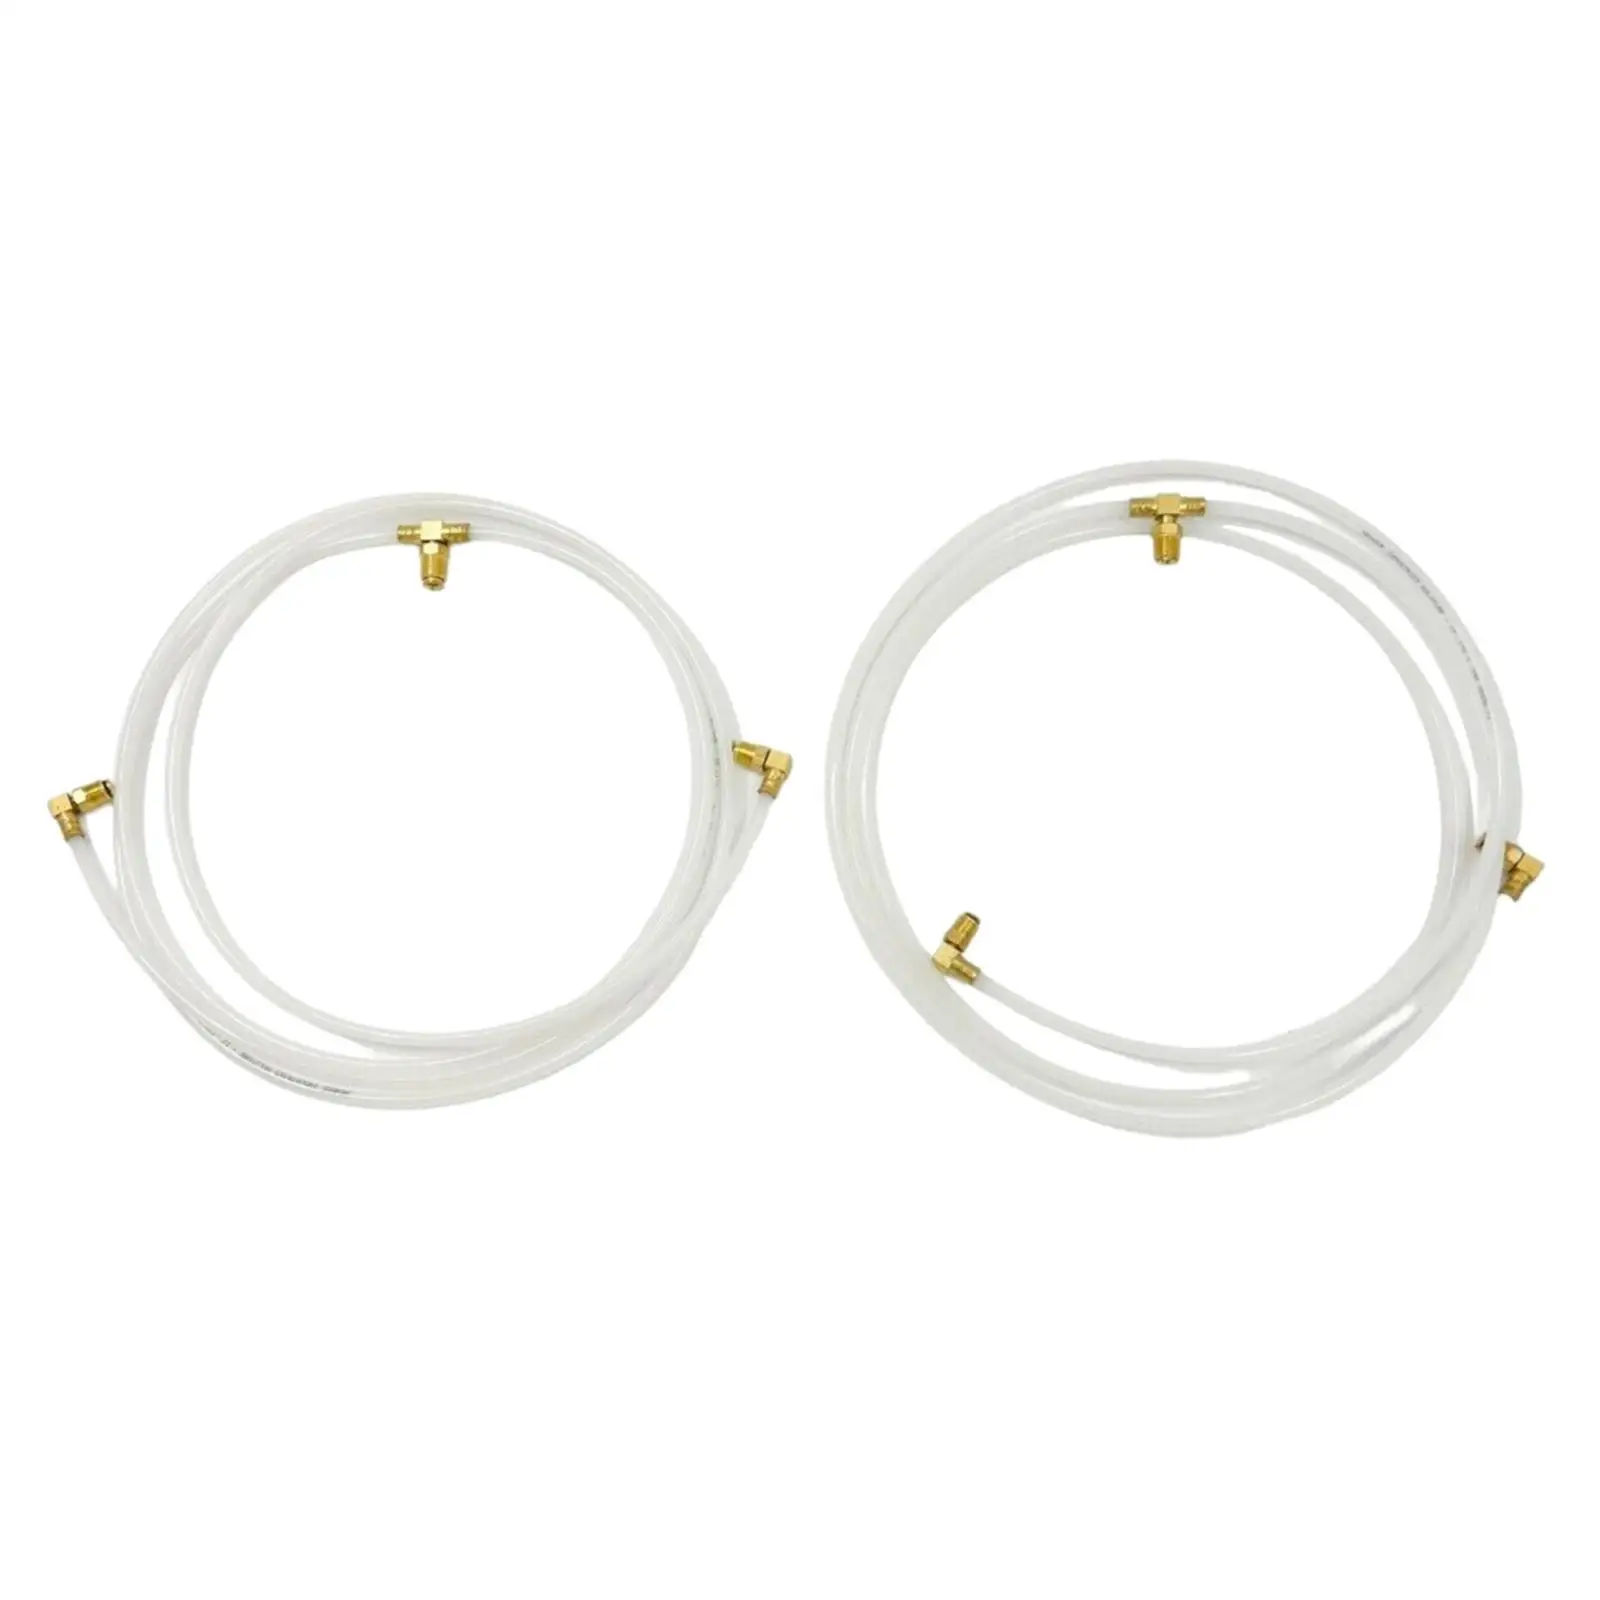 Convertible Top Hydraulic Fluid Hose Line Pair Hoses Ho-white-set for Chevrolet Chevy II Impala Professional Quality